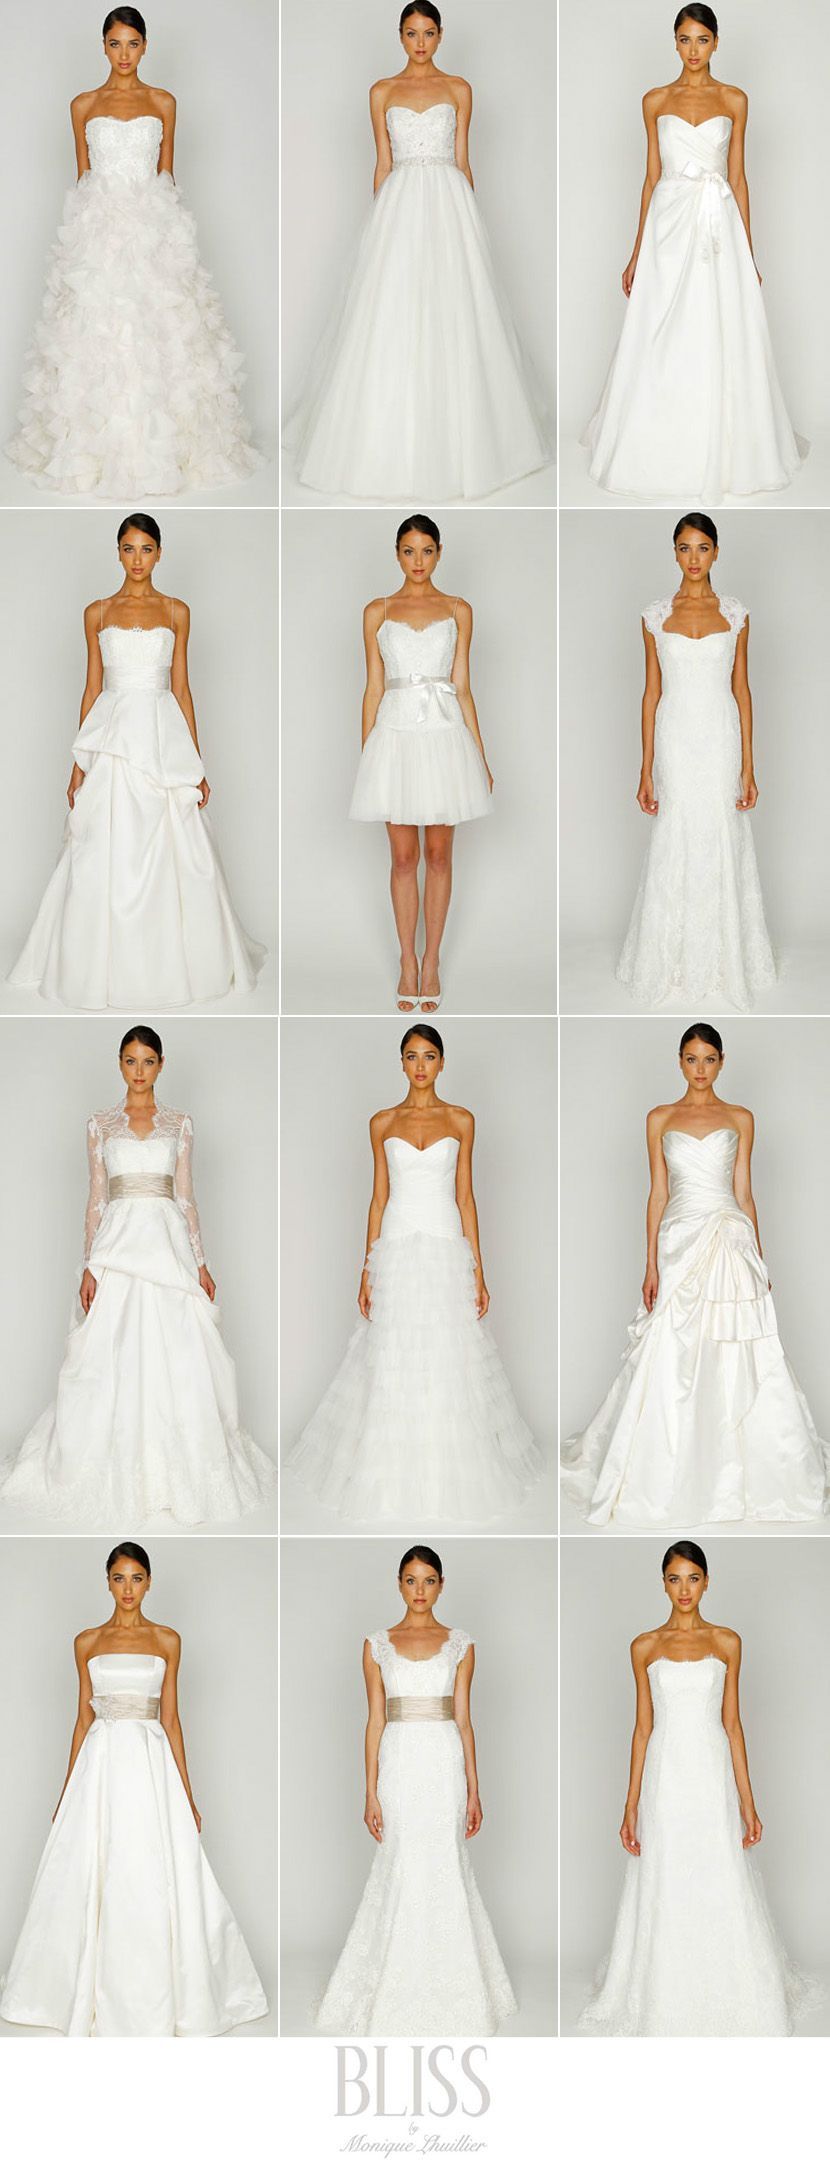 wedding dress shapes – good guide to look at before you go hunting for your wedding dress